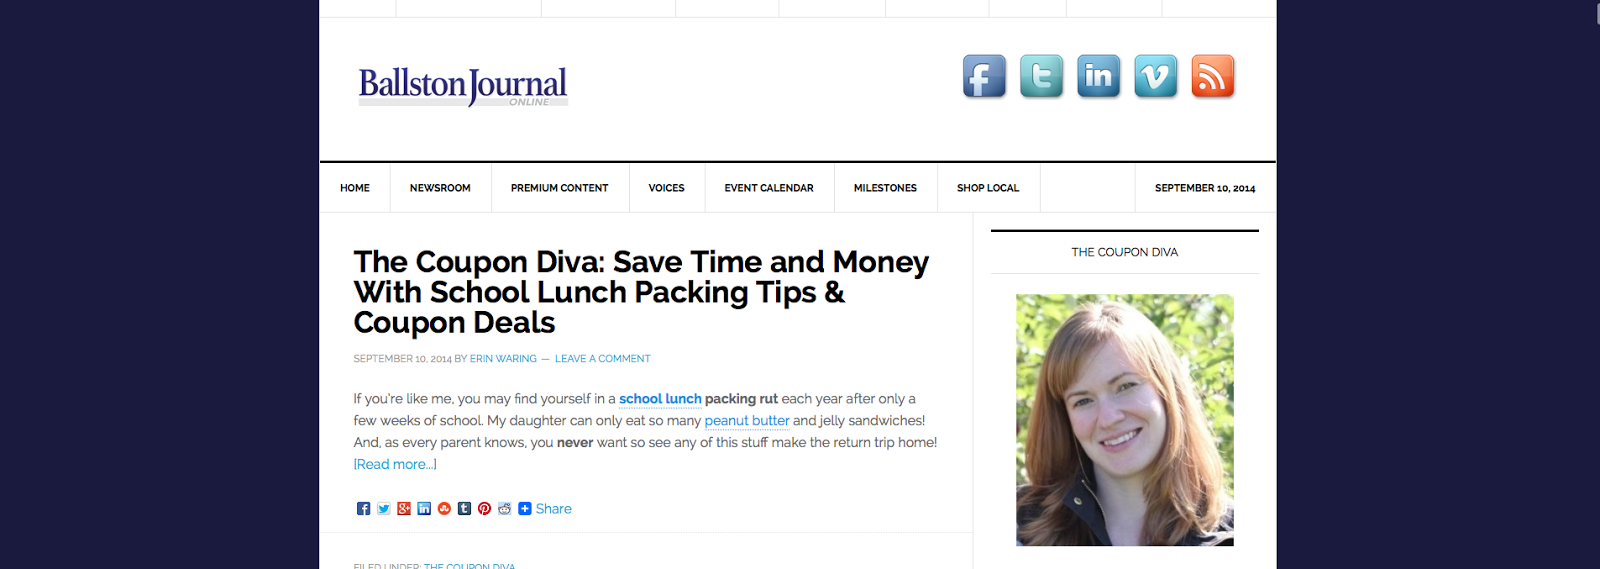 http://theballstonjournal.com/2014/09/10/coupon-diva-save-time-money-school-lunch-packing-tips-coupon-deals/